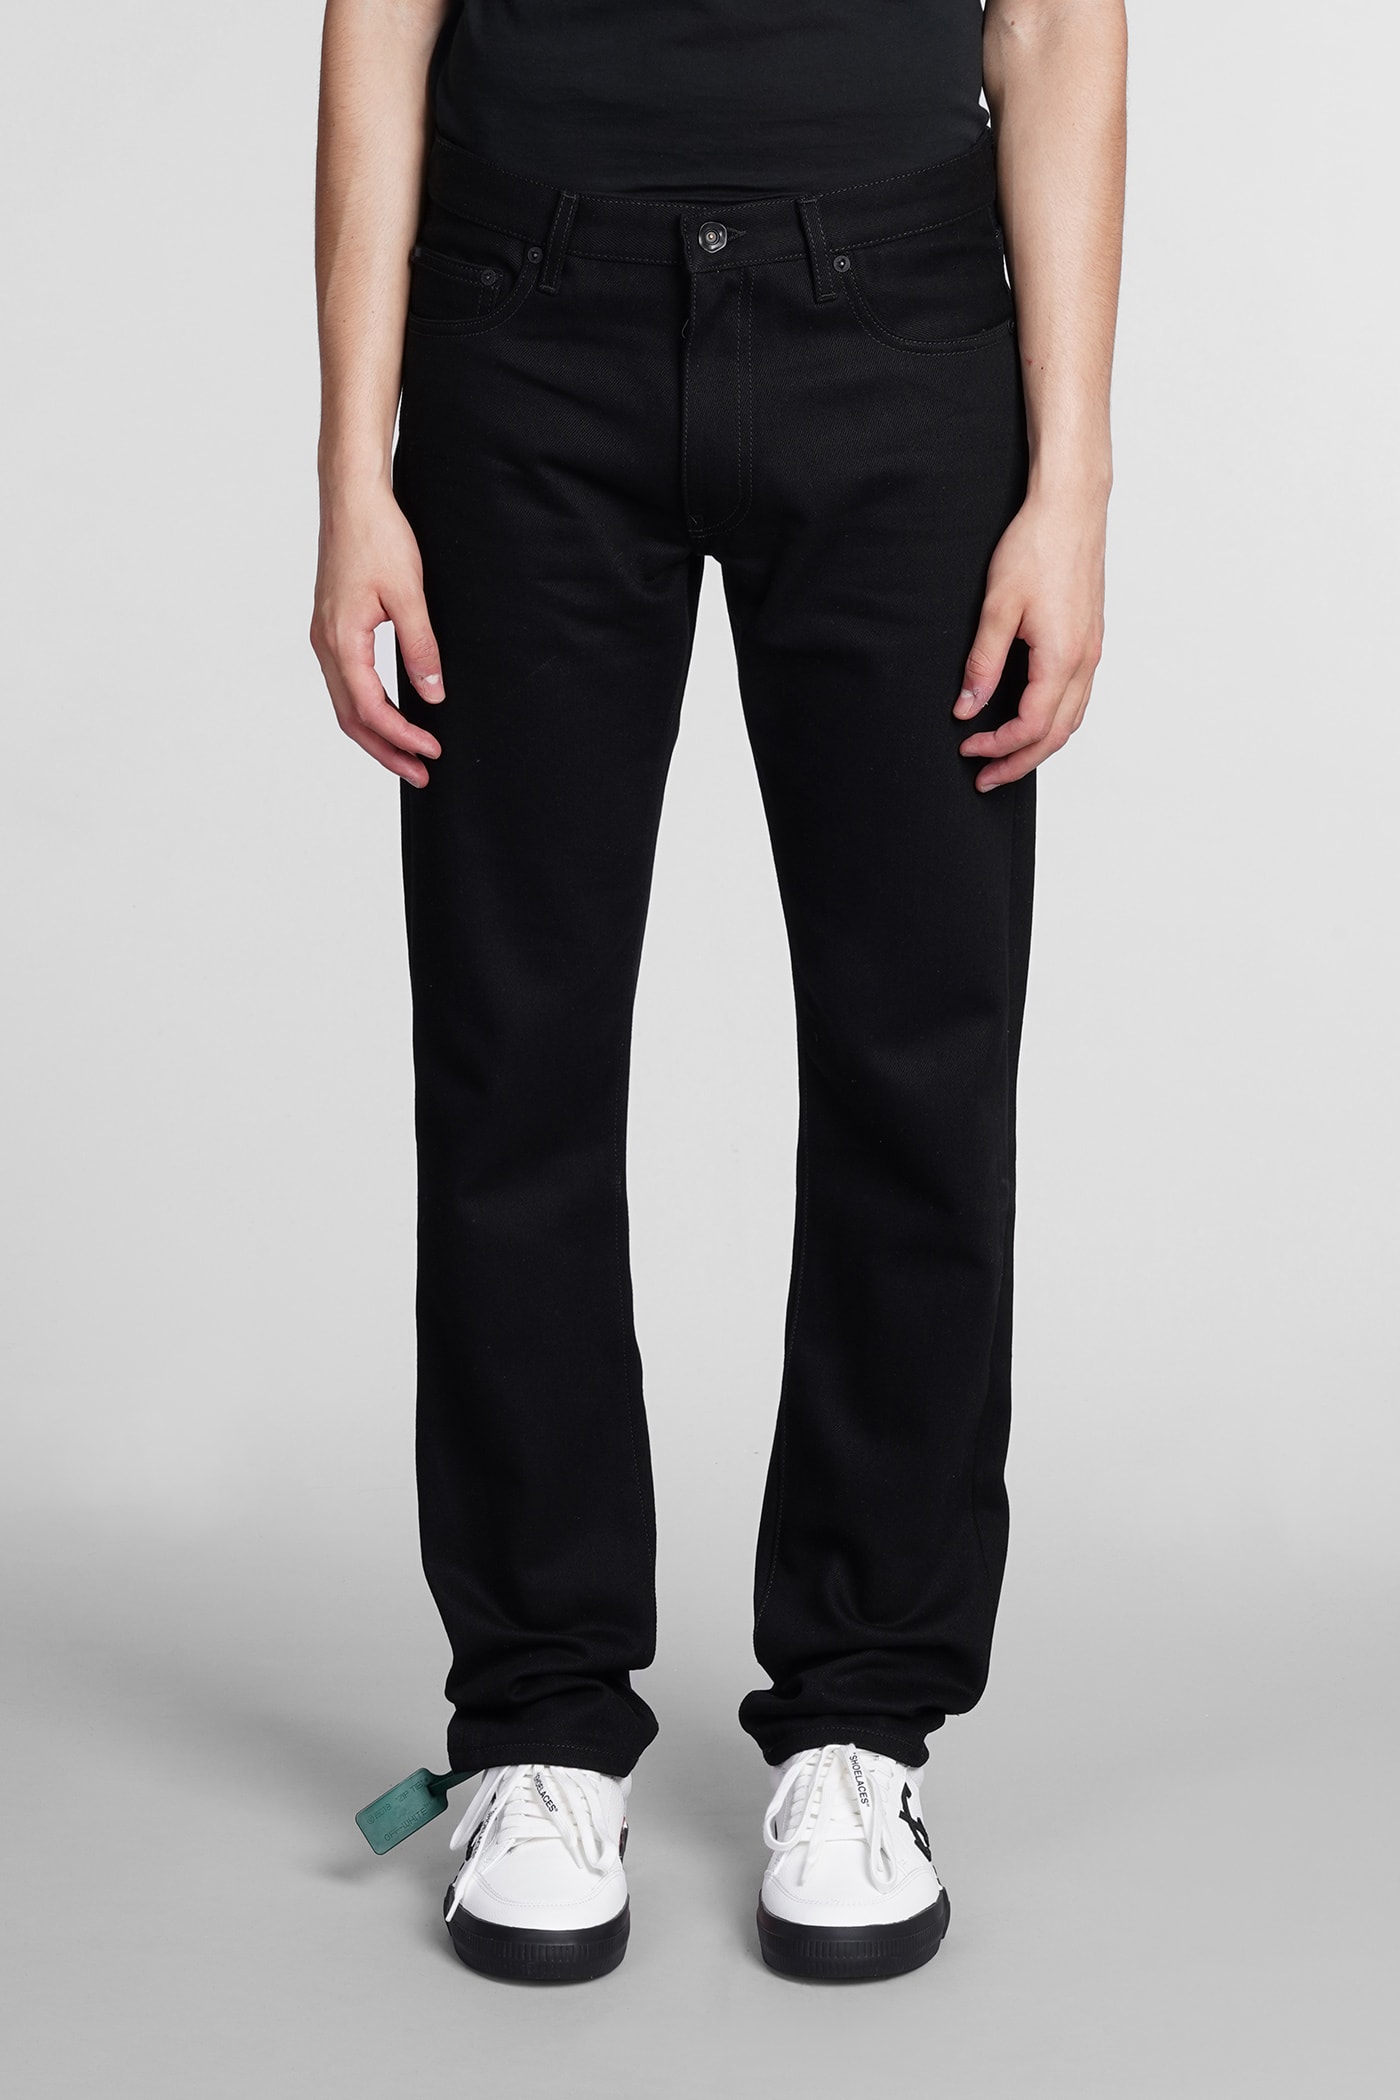 Off-White Jeans In Black Cotton